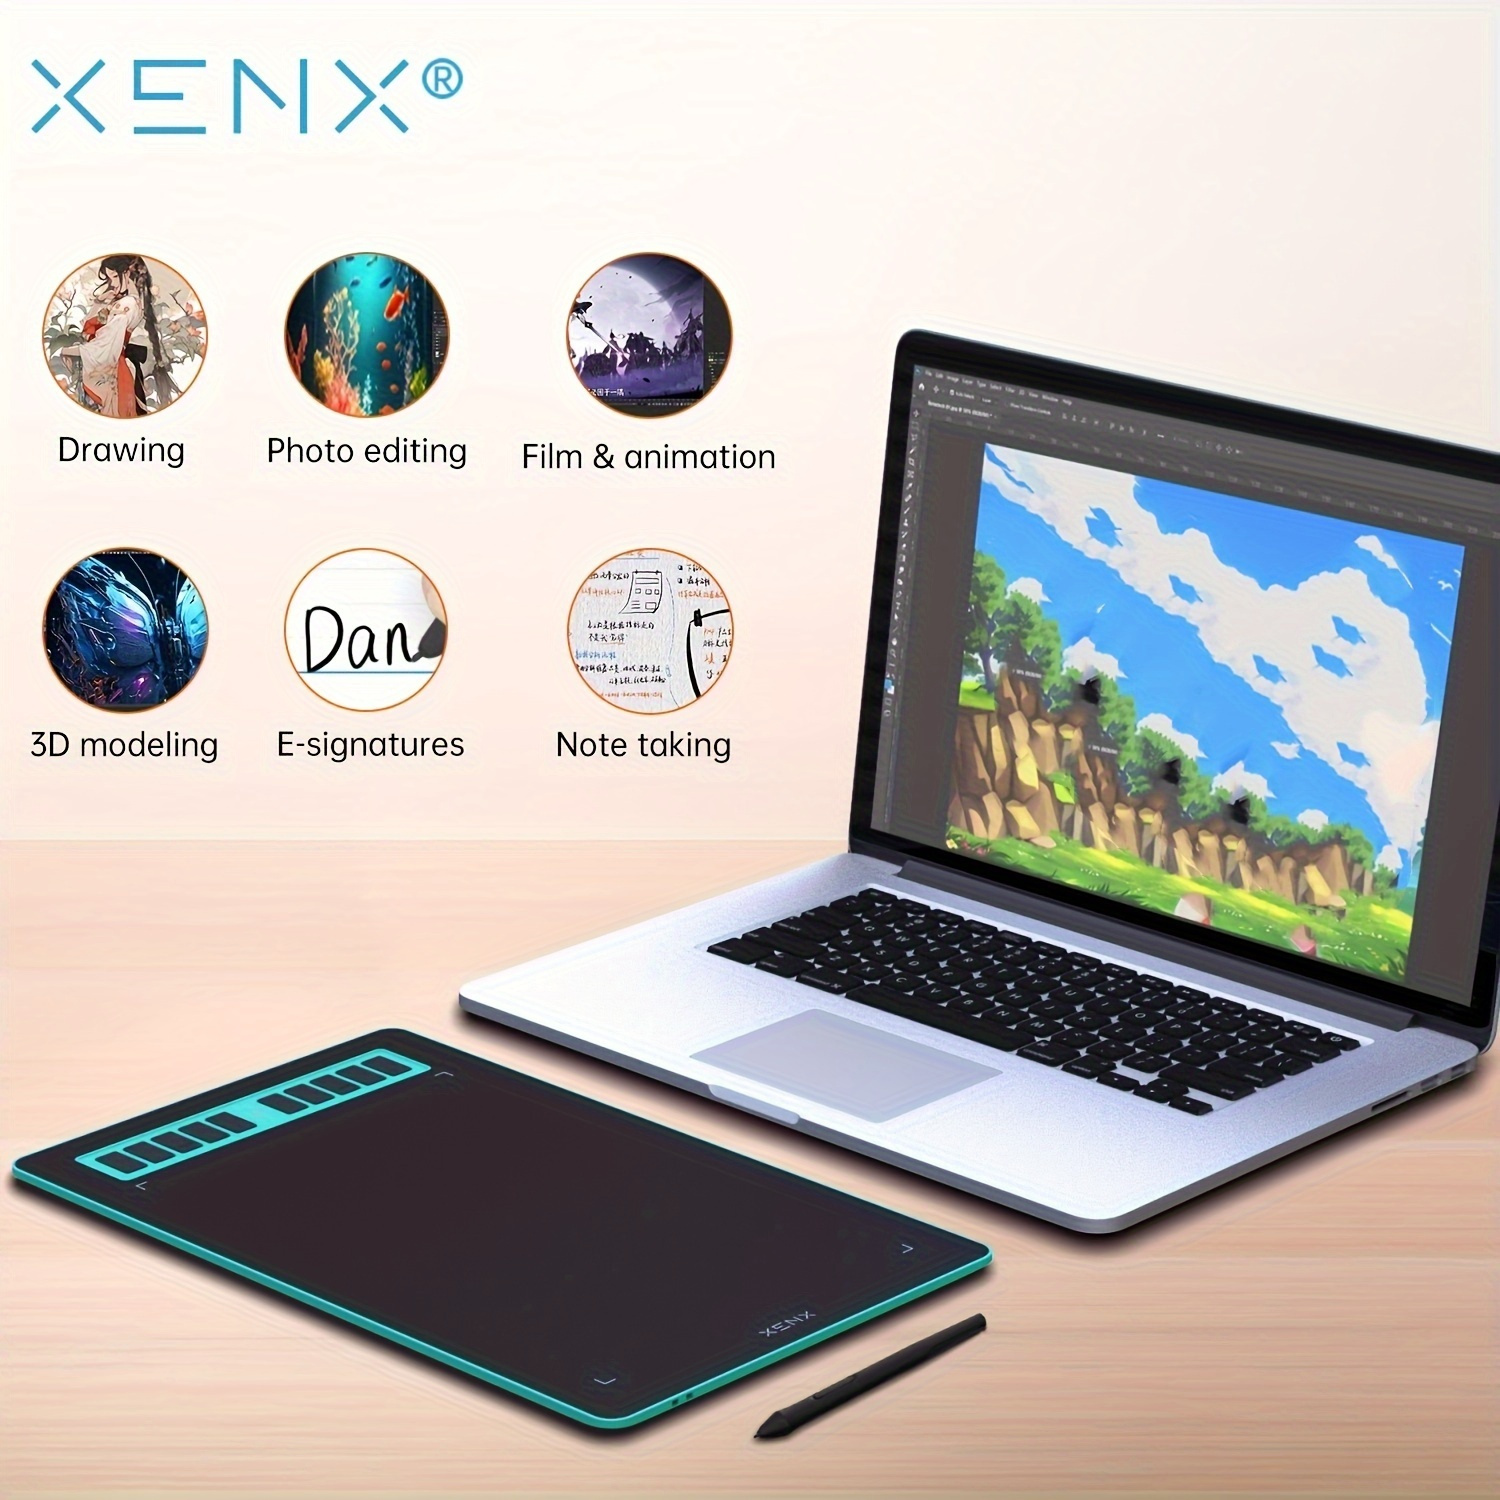 

Xenx P3-1060 Green Graphics Drawing Tablet With 8192 Pressure Sensitivity Battery-free Stylus And 10 Hot Keys, 10 X 6.22 Inches Digital Art Tablet For , Windows Pc And Android